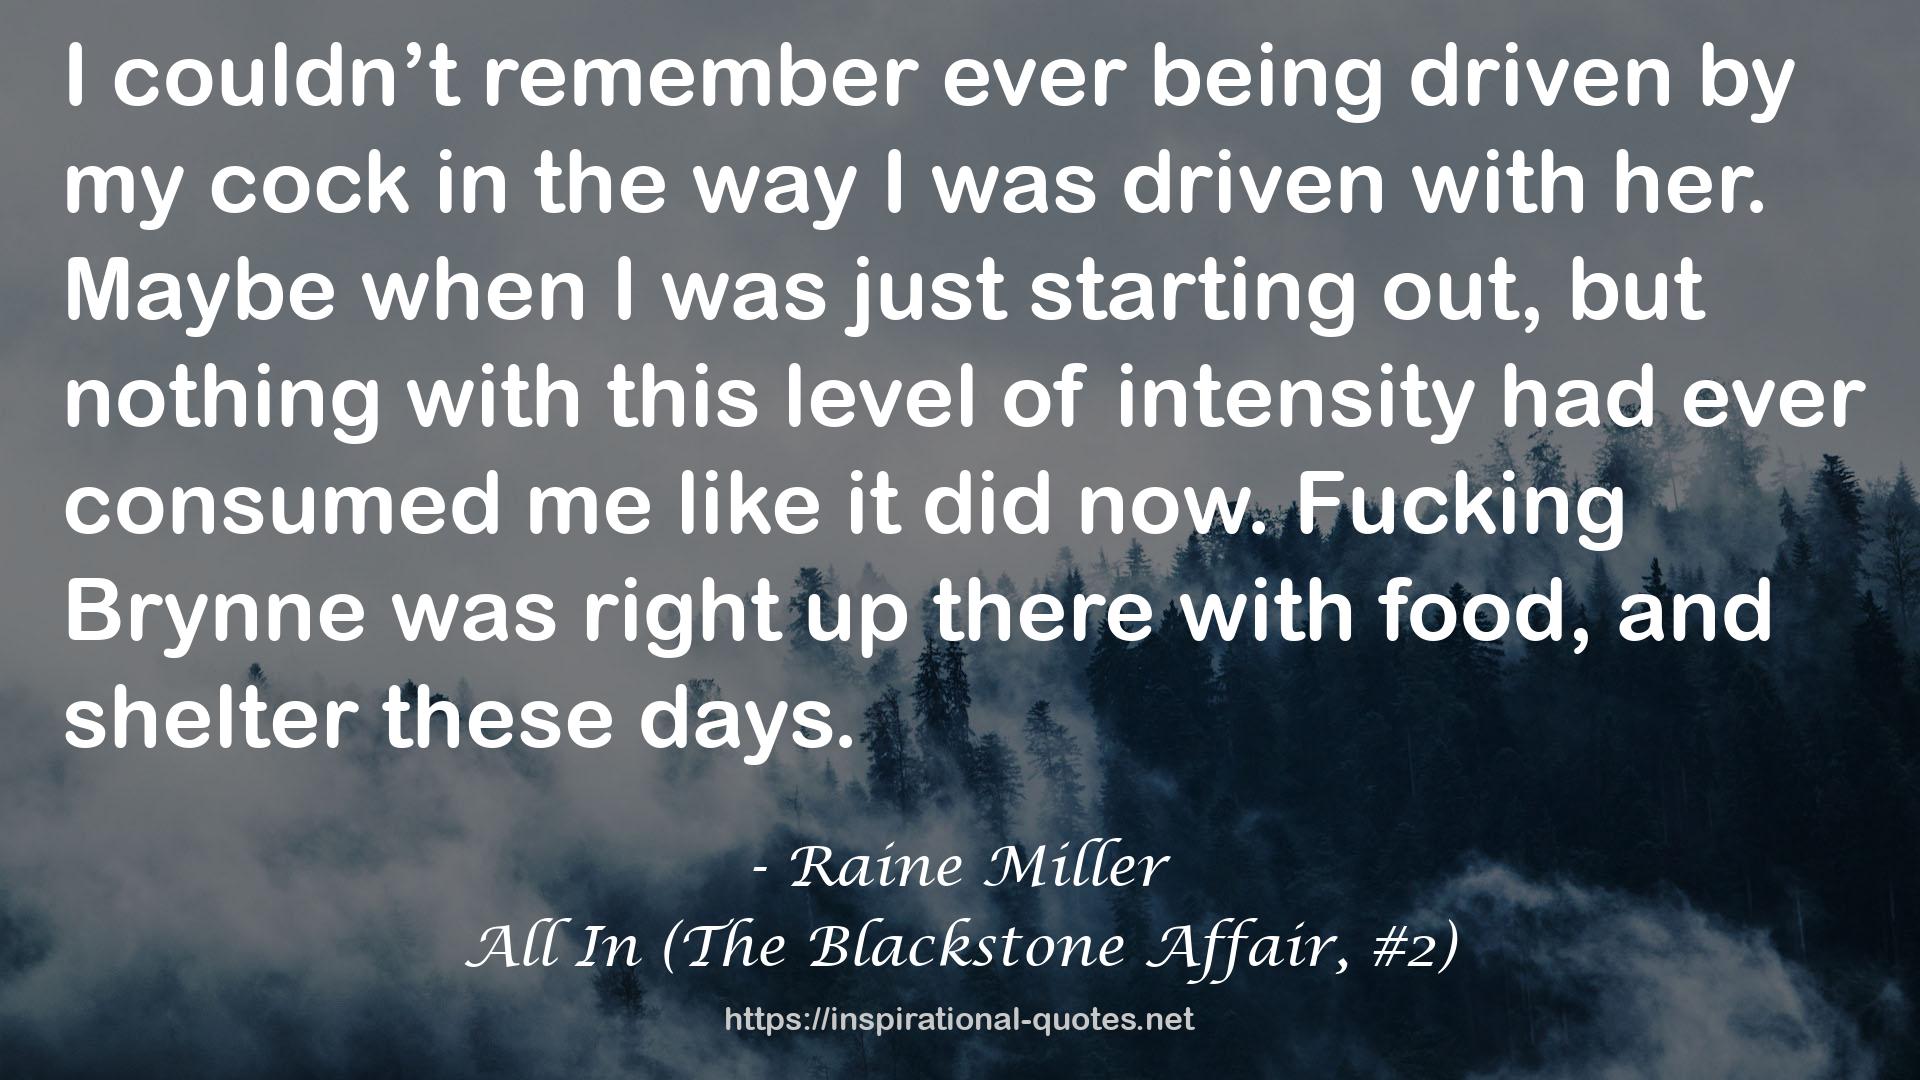 All In (The Blackstone Affair, #2) QUOTES